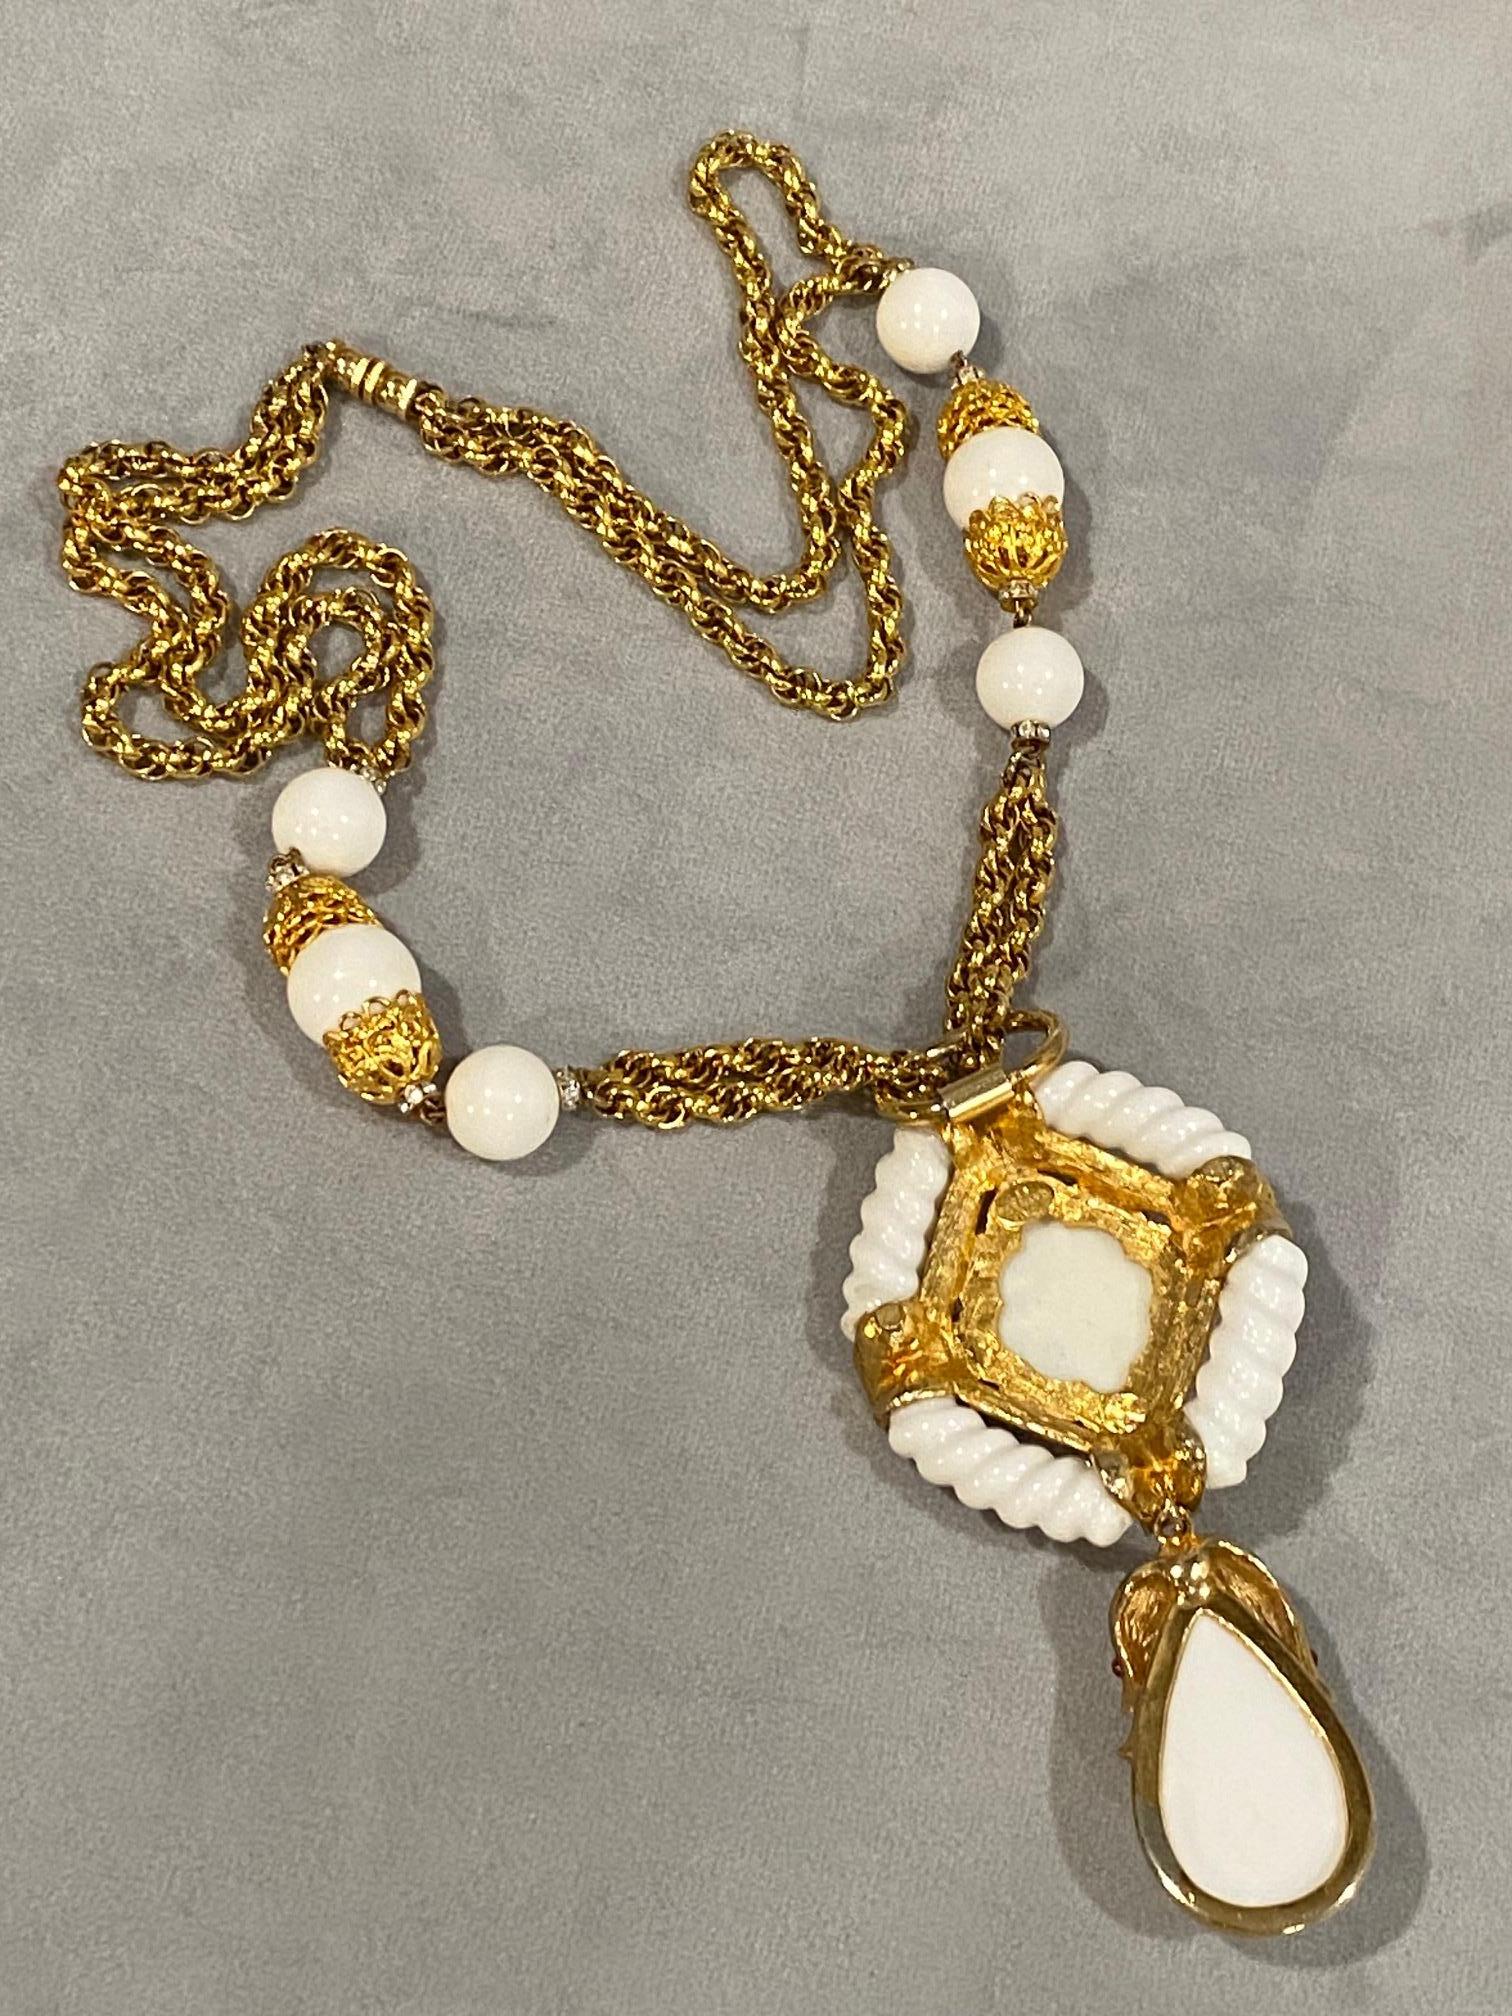 Les Bernard 1980s Pendant Necklace in Gold & White with Rhinestone Accent For Sale 12